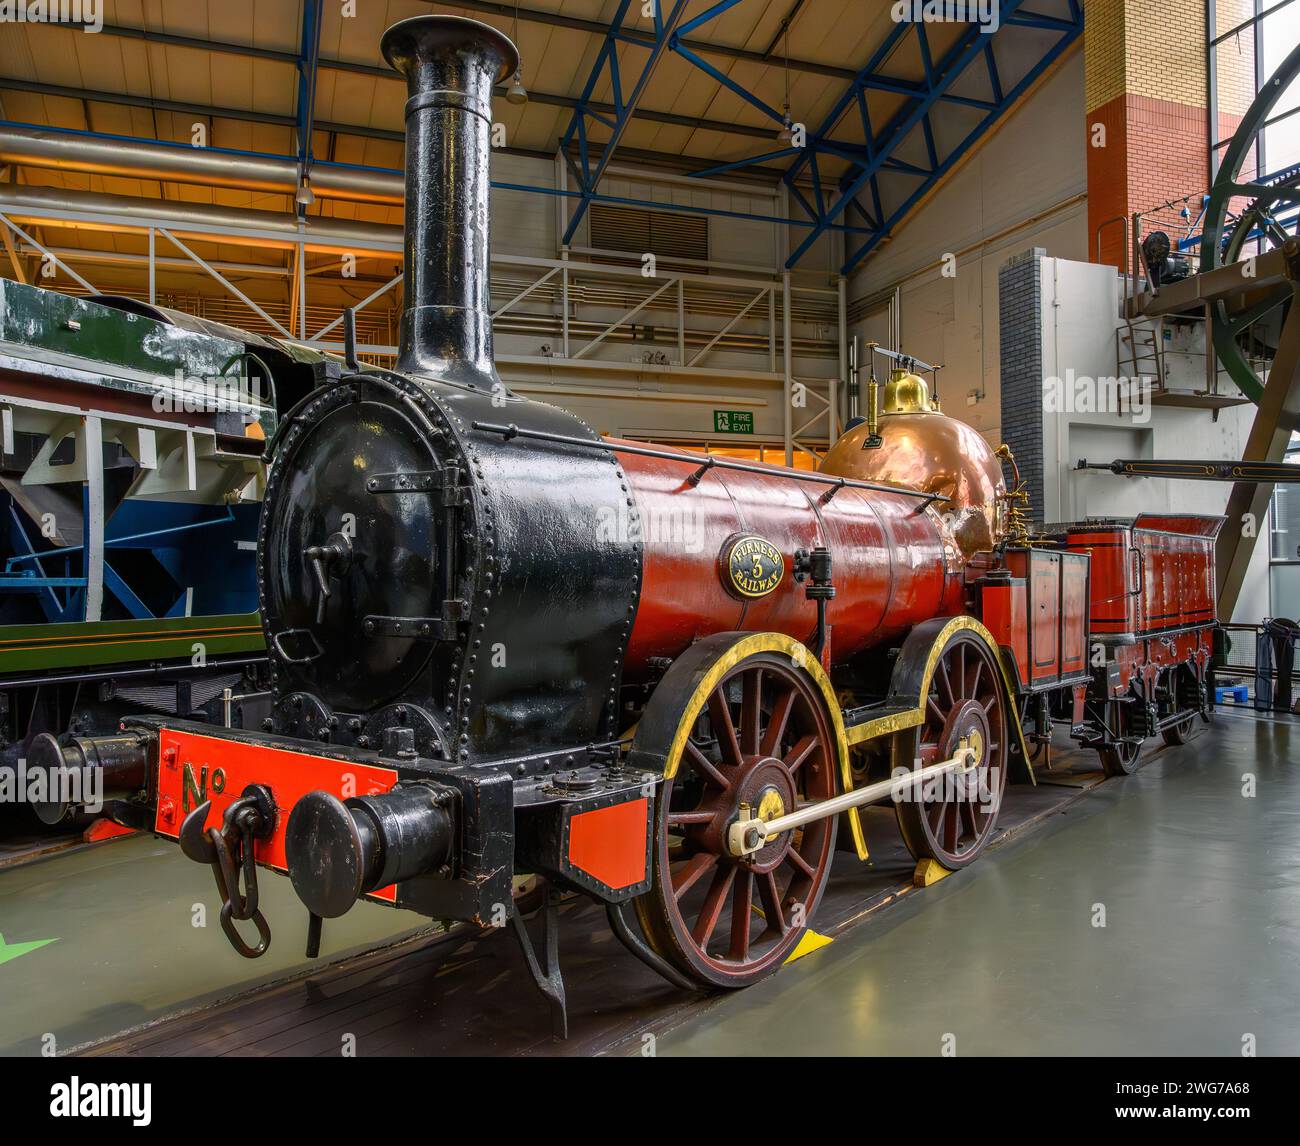 Furness Railway No.3, nicknamed 'Old Coppernob', Great Hall, National Railway Museum, York, England. It was built in 1846 by Bury, Curtis, and Kennedy Stock Photo